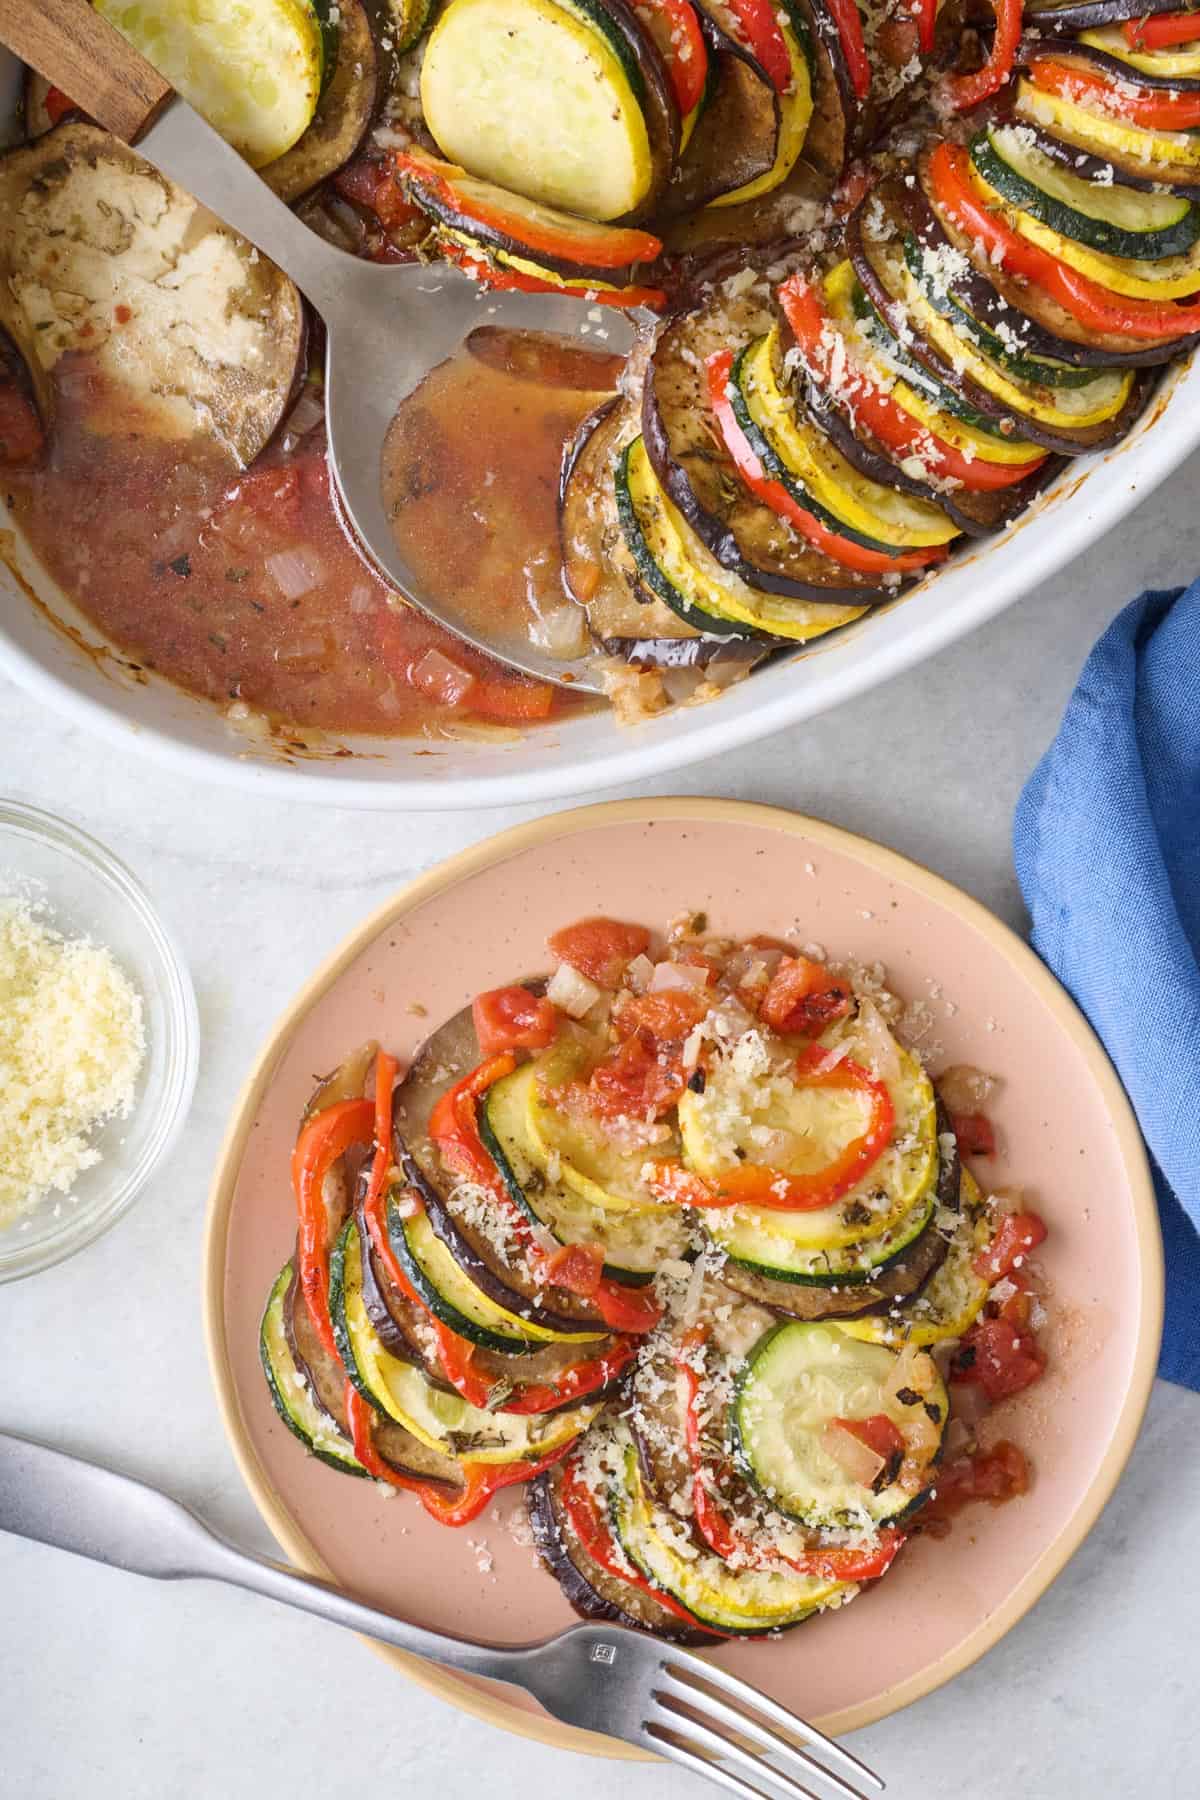 Baking dish of ratatouille with serving removed to a plate on the side to show tomato sauce mixture on the bottom of pan.